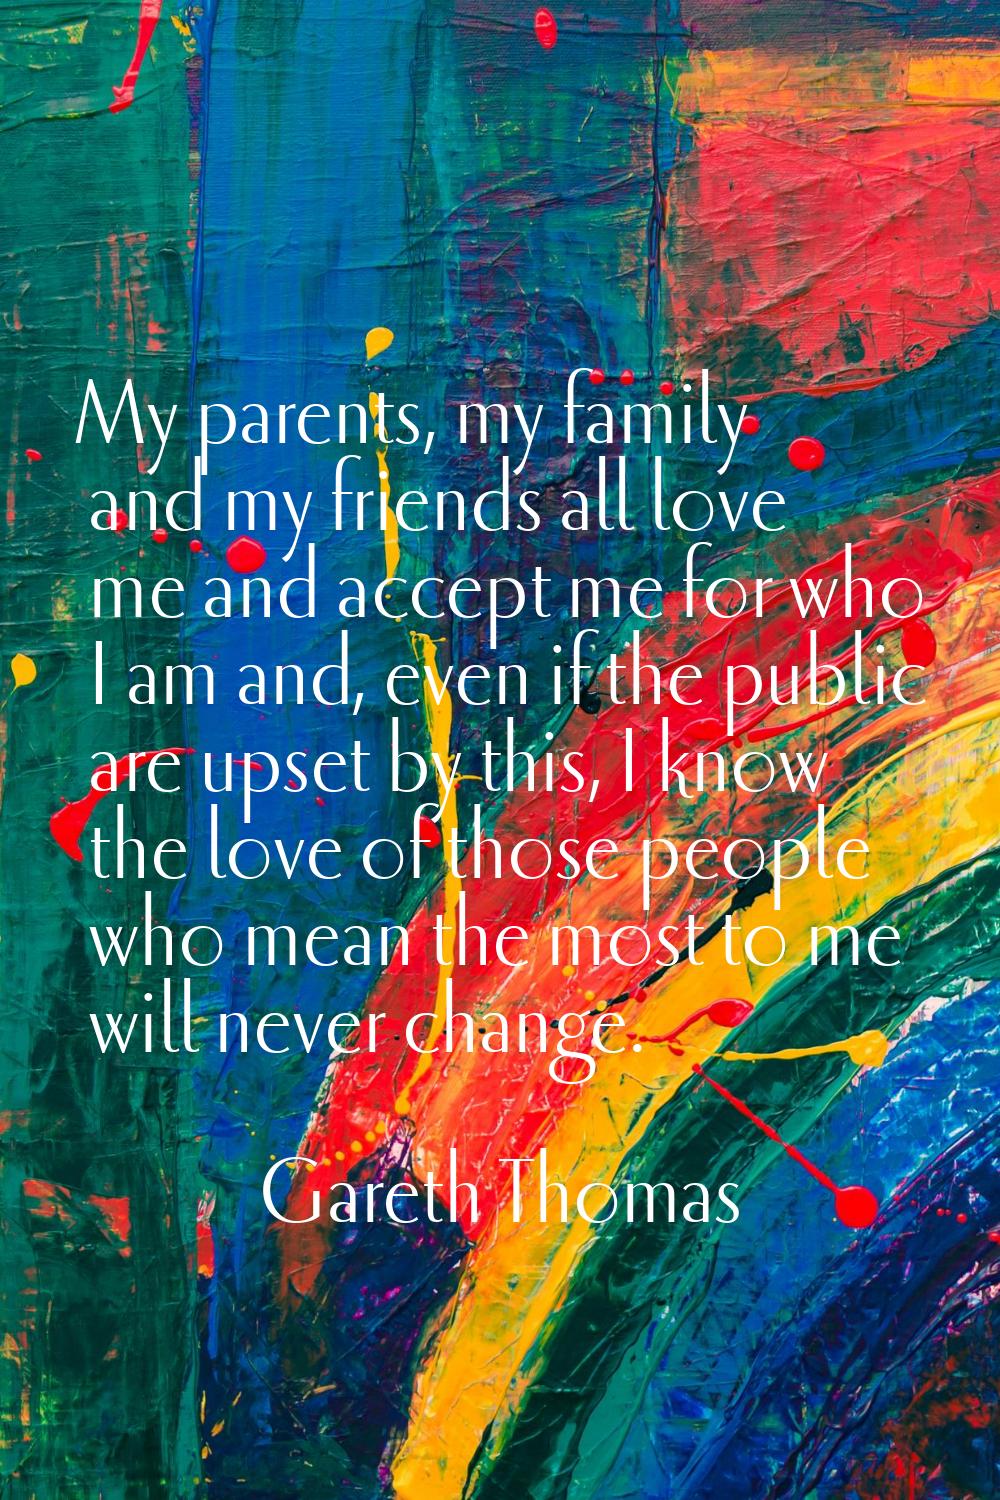 My parents, my family and my friends all love me and accept me for who I am and, even if the public